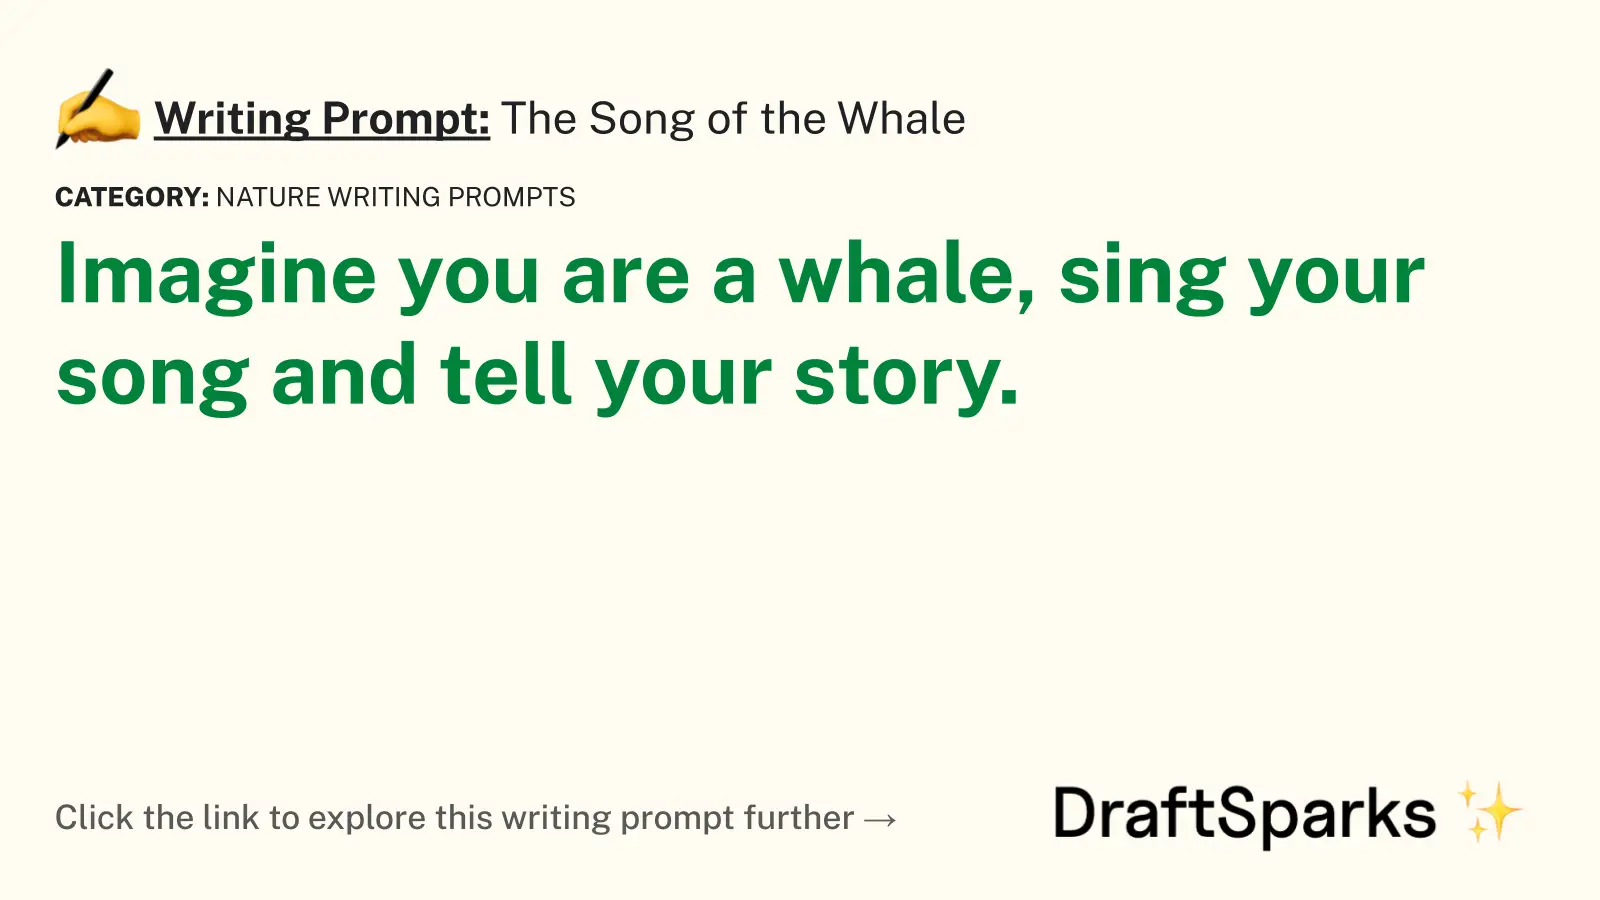 The Song of the Whale